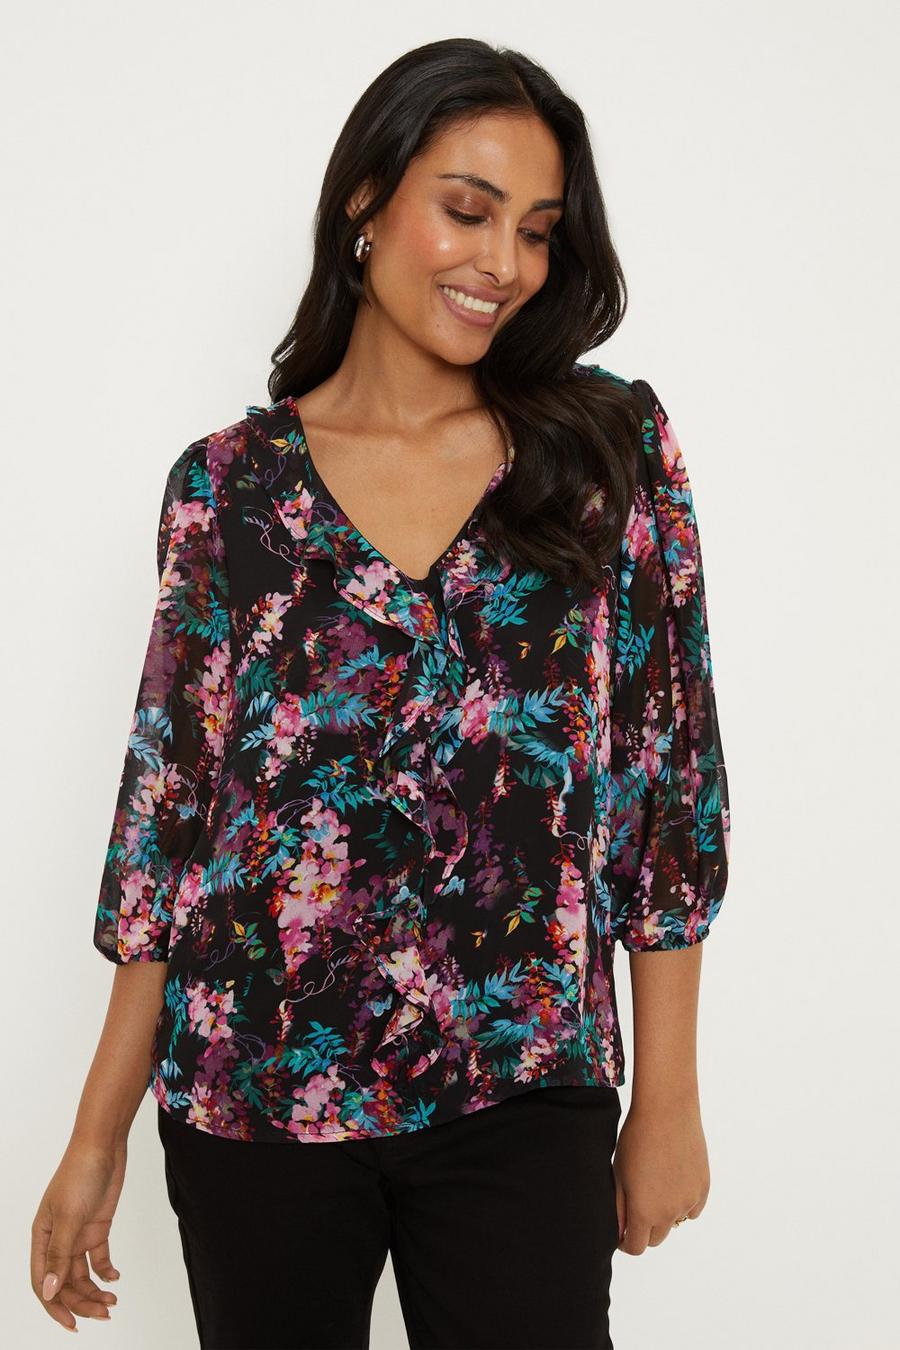 Petite Black Floral Ruffle Front Top